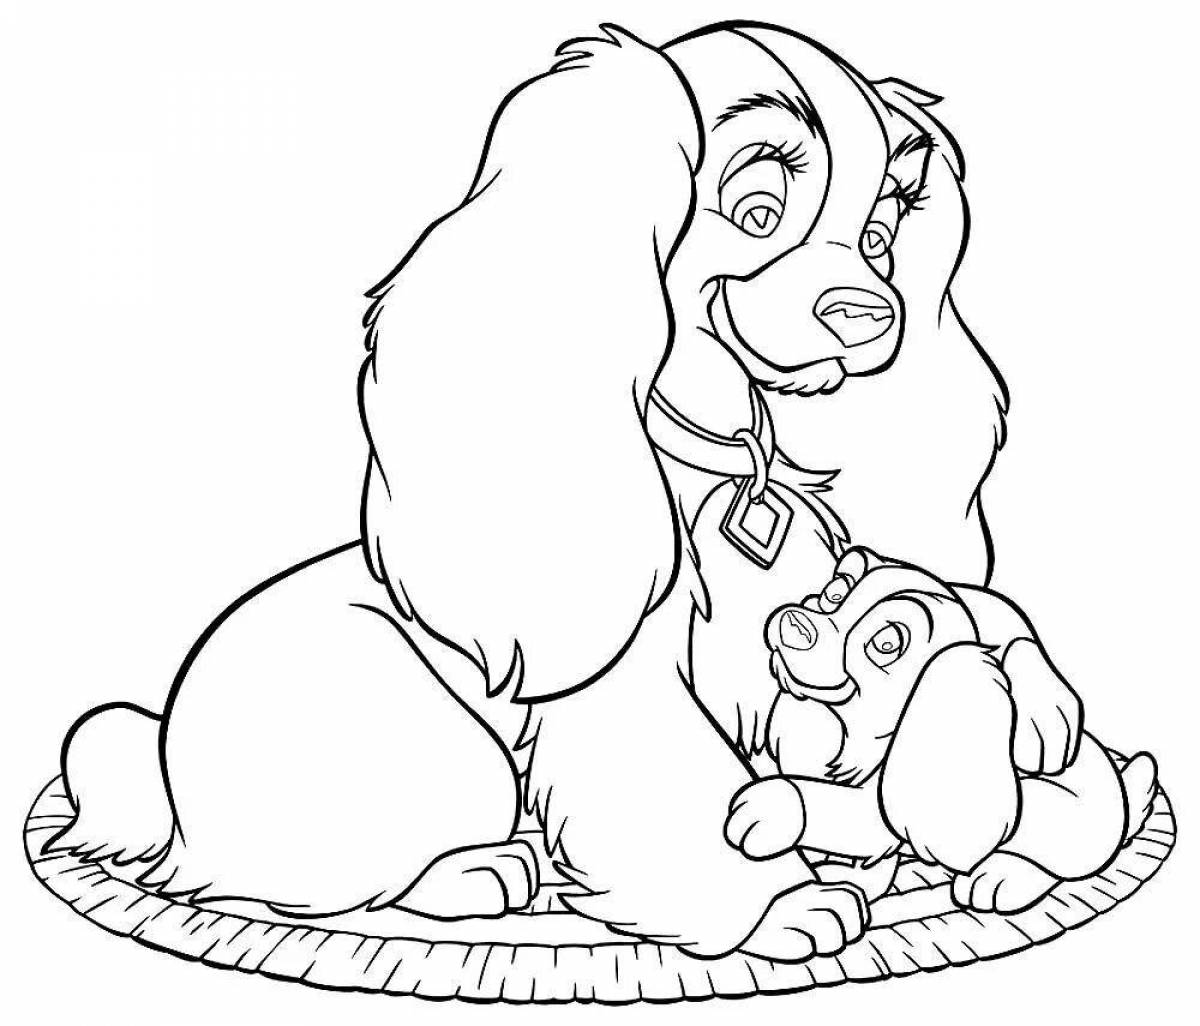 Entertaining dog coloring book for children 7-8 years old